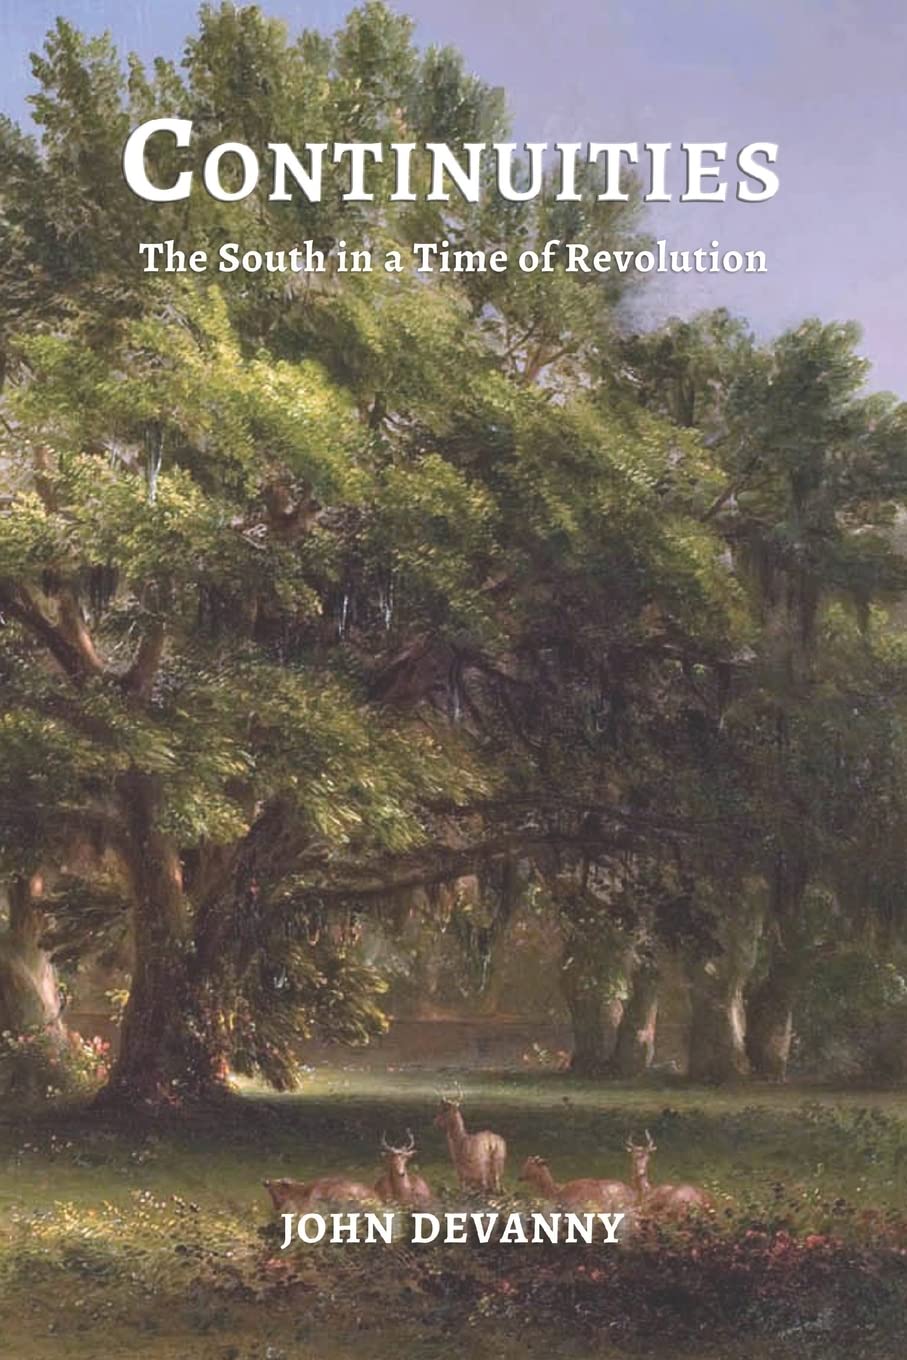 The South in a Revolutionary Time